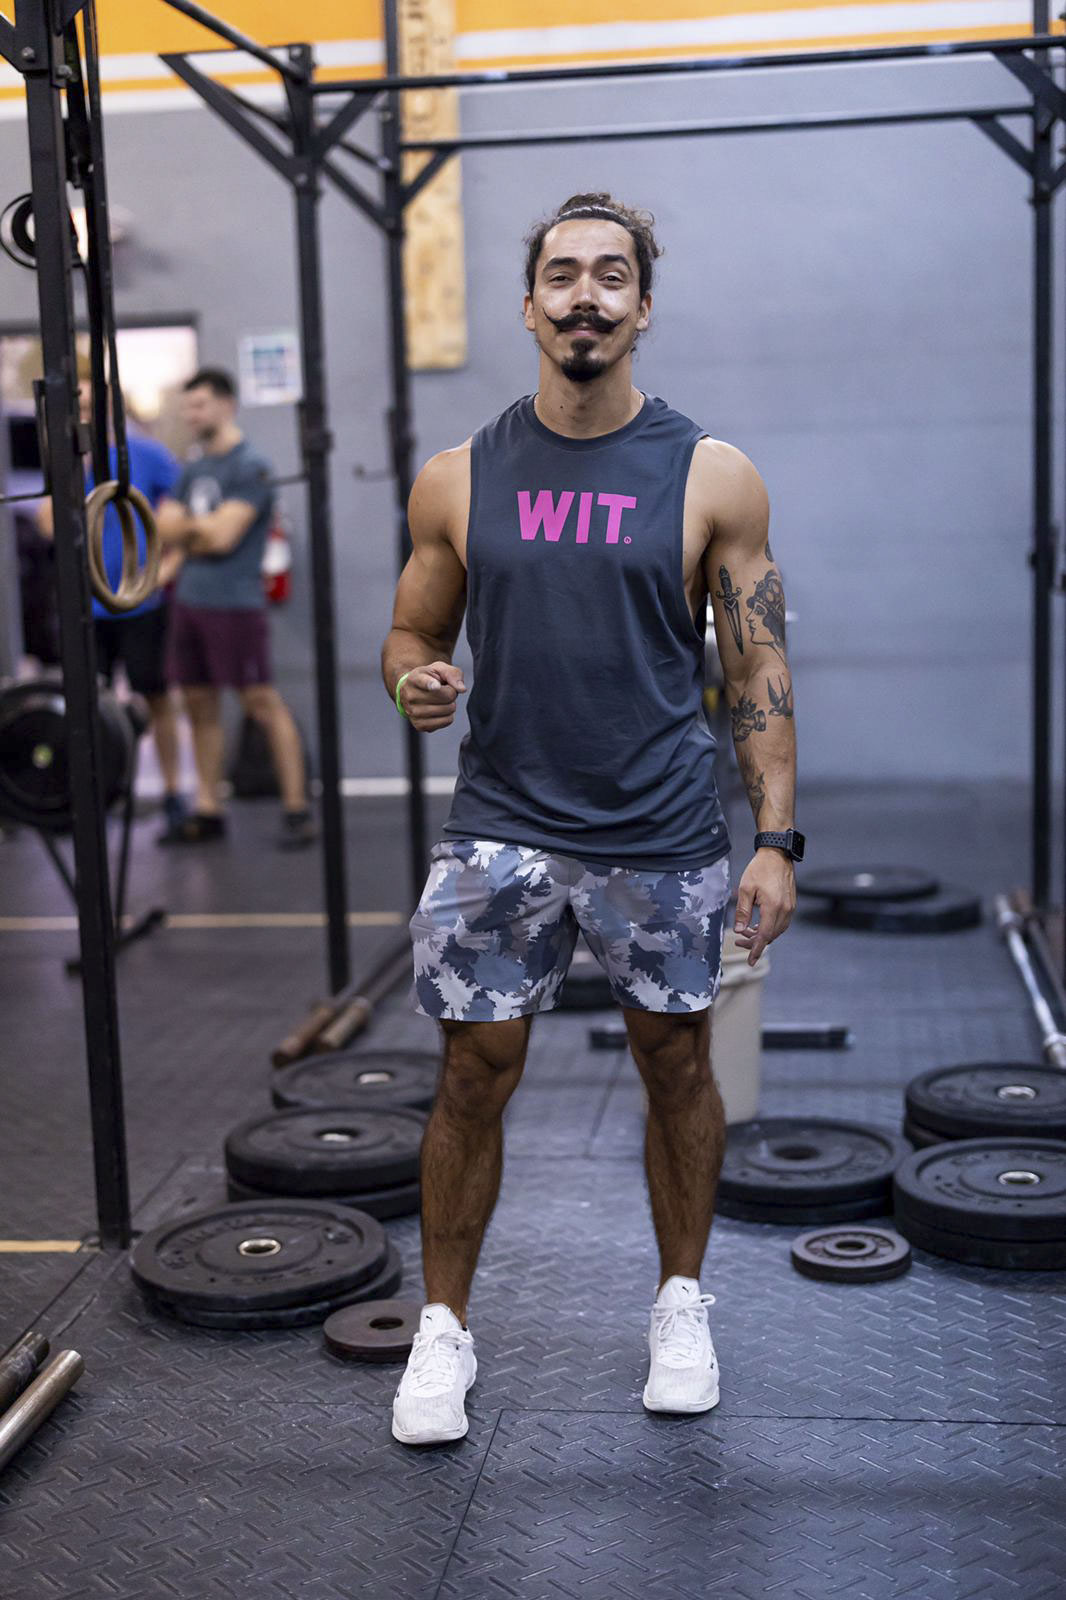 Gus Vaz Tostes is the head of training at leading London CrossFit gym Wit Fitness